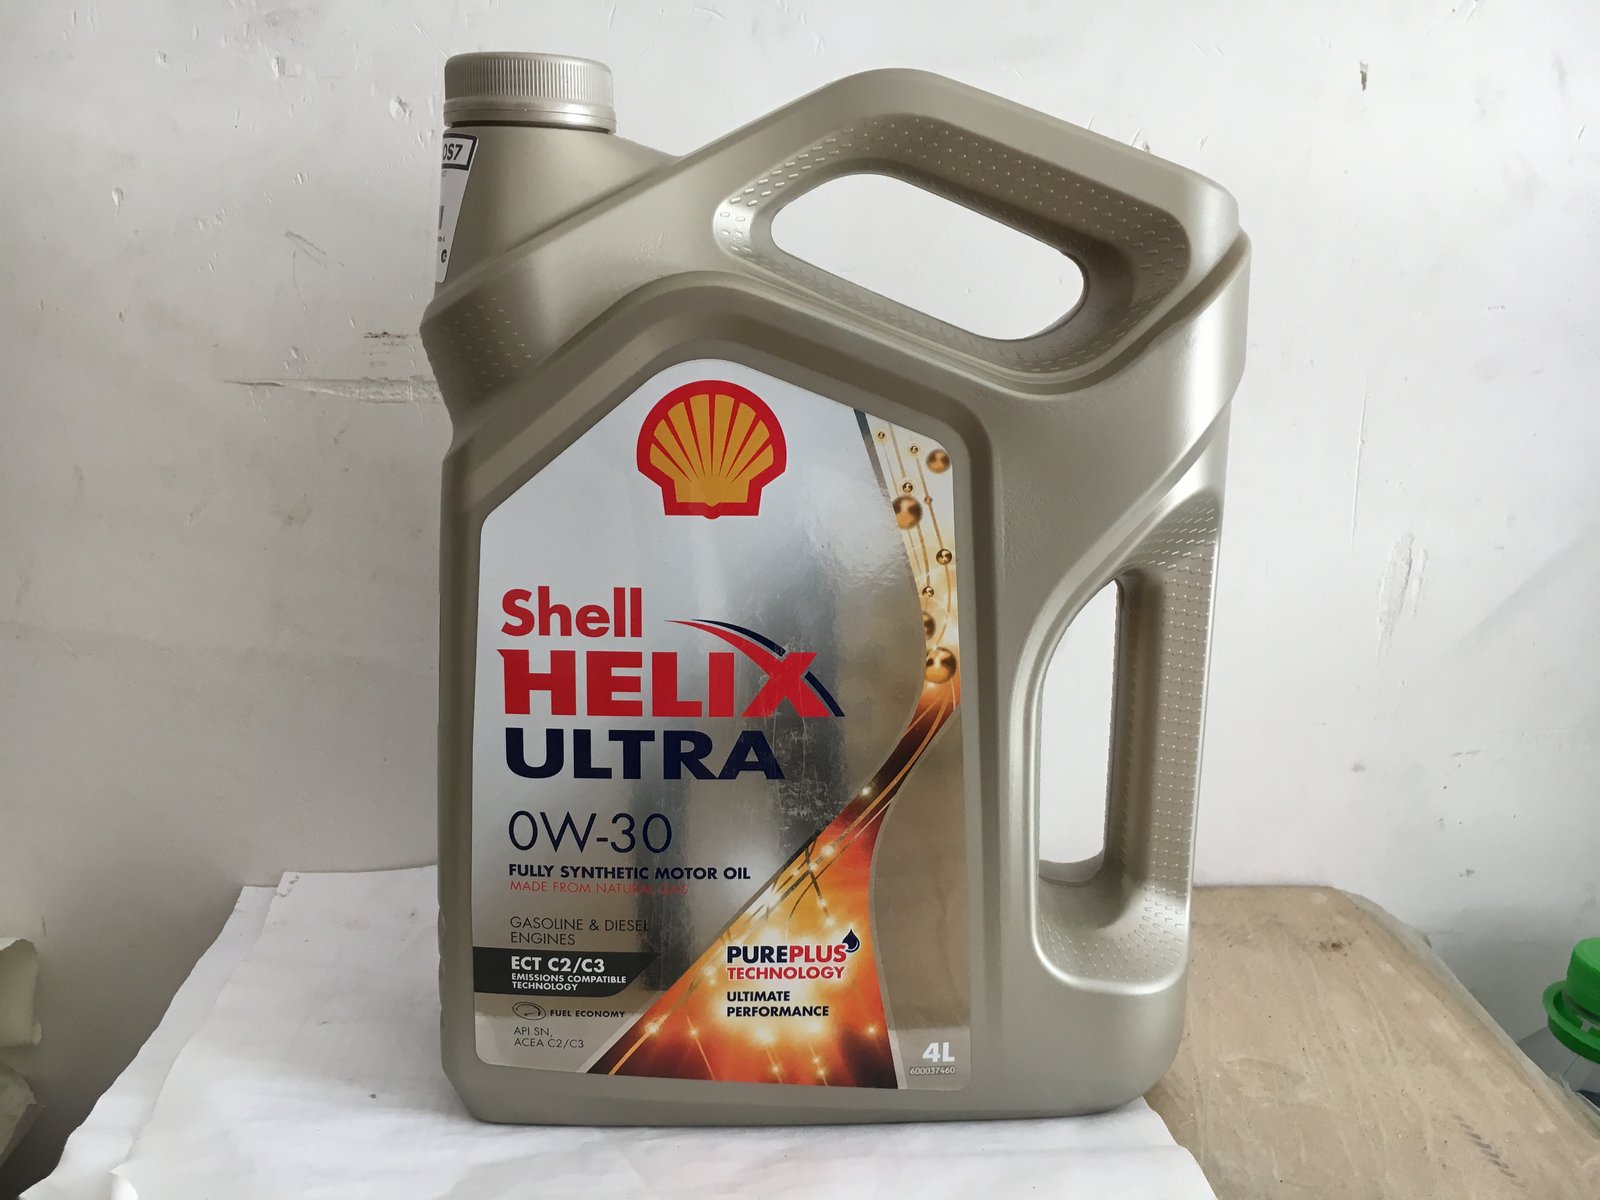 Масло 0w30 504. Shell 0w30 504/507. Shell Helix Ultra ect c2/c3 0w-30. Shell Helix Ultra 0w-30 c2/c3. Shell 0w30 c2/c3.